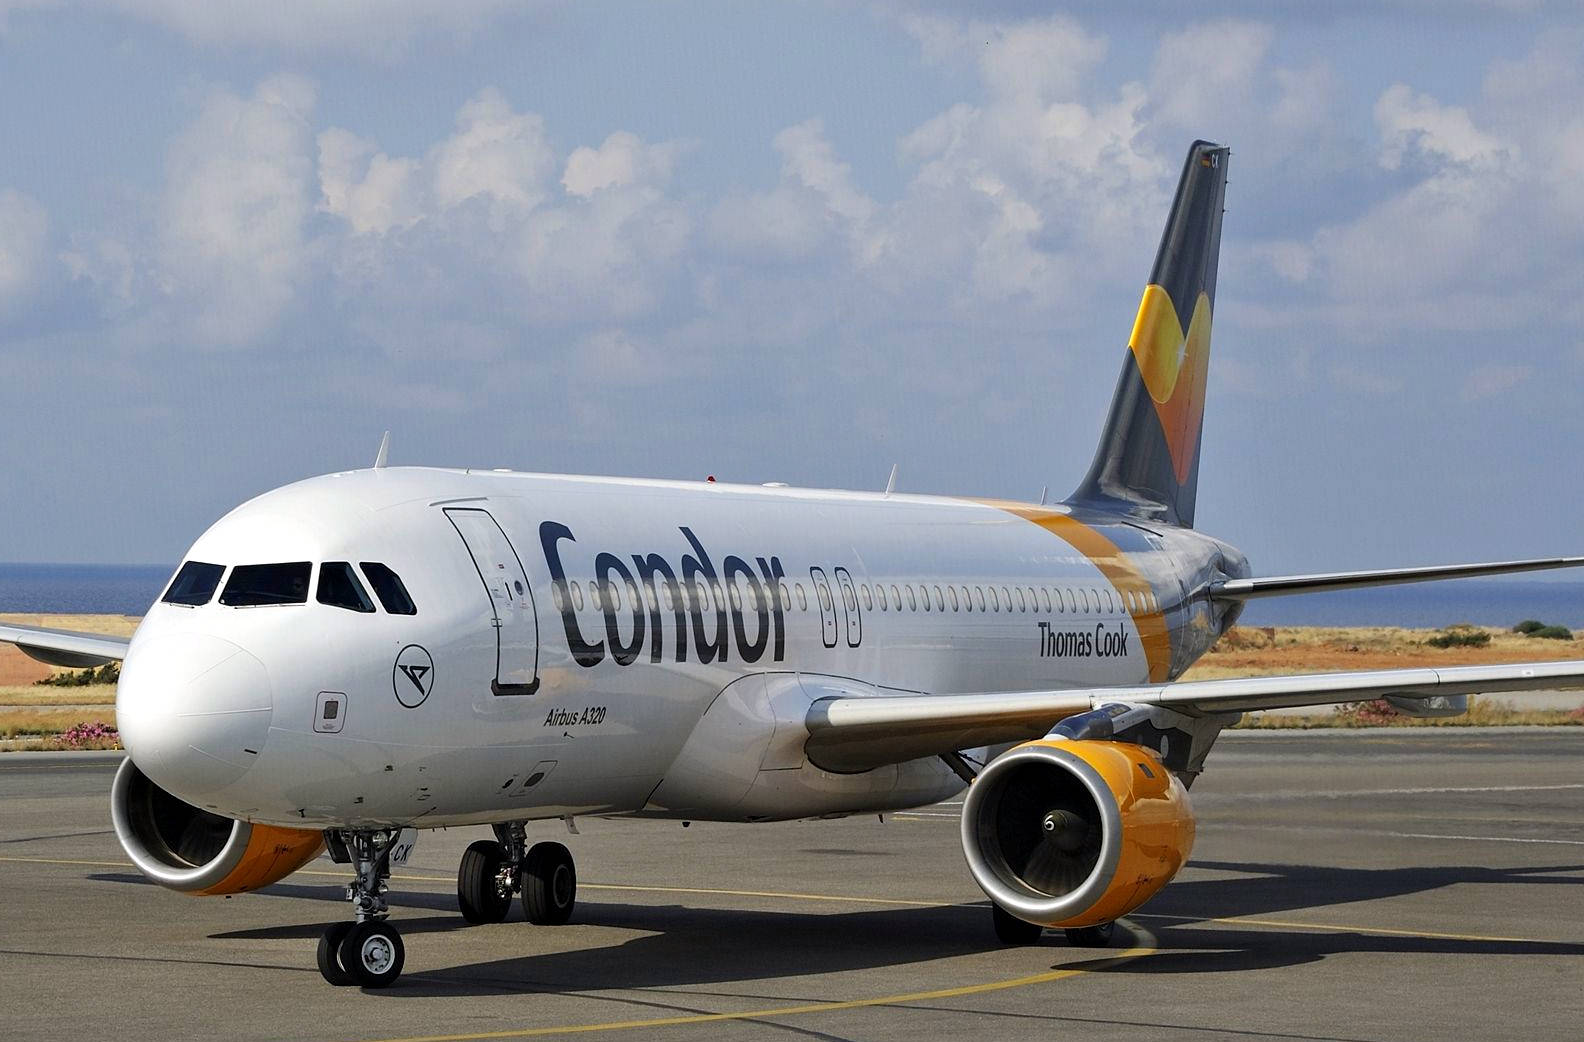 Condor Airlines Parked Passenger Airplane Wallpaper